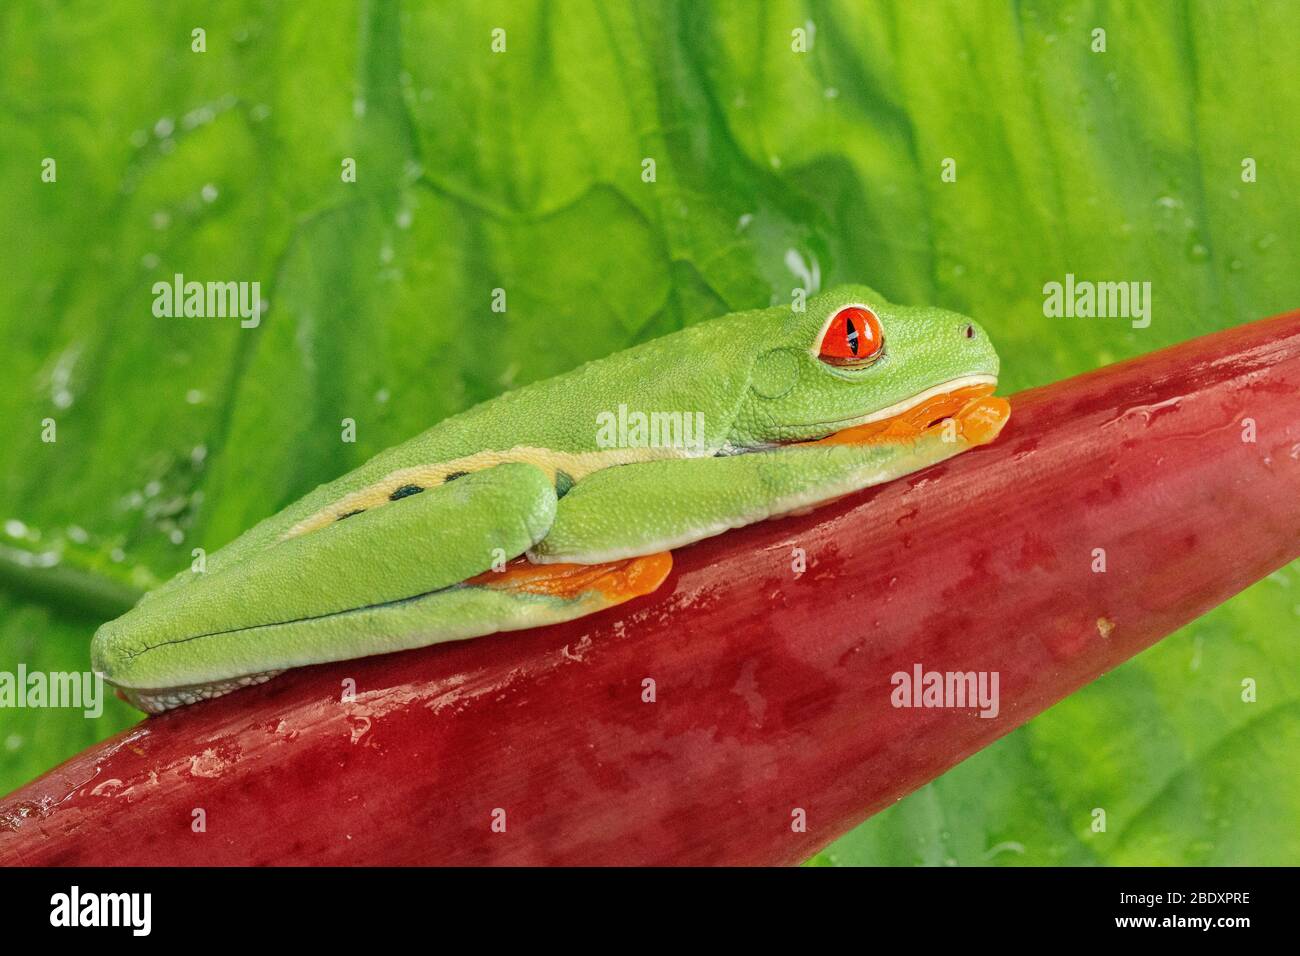 A Red-eyed leaf frog (Agalychnis callidryas) resting on a red heliconia leaf in Costa Rica Stock Photo